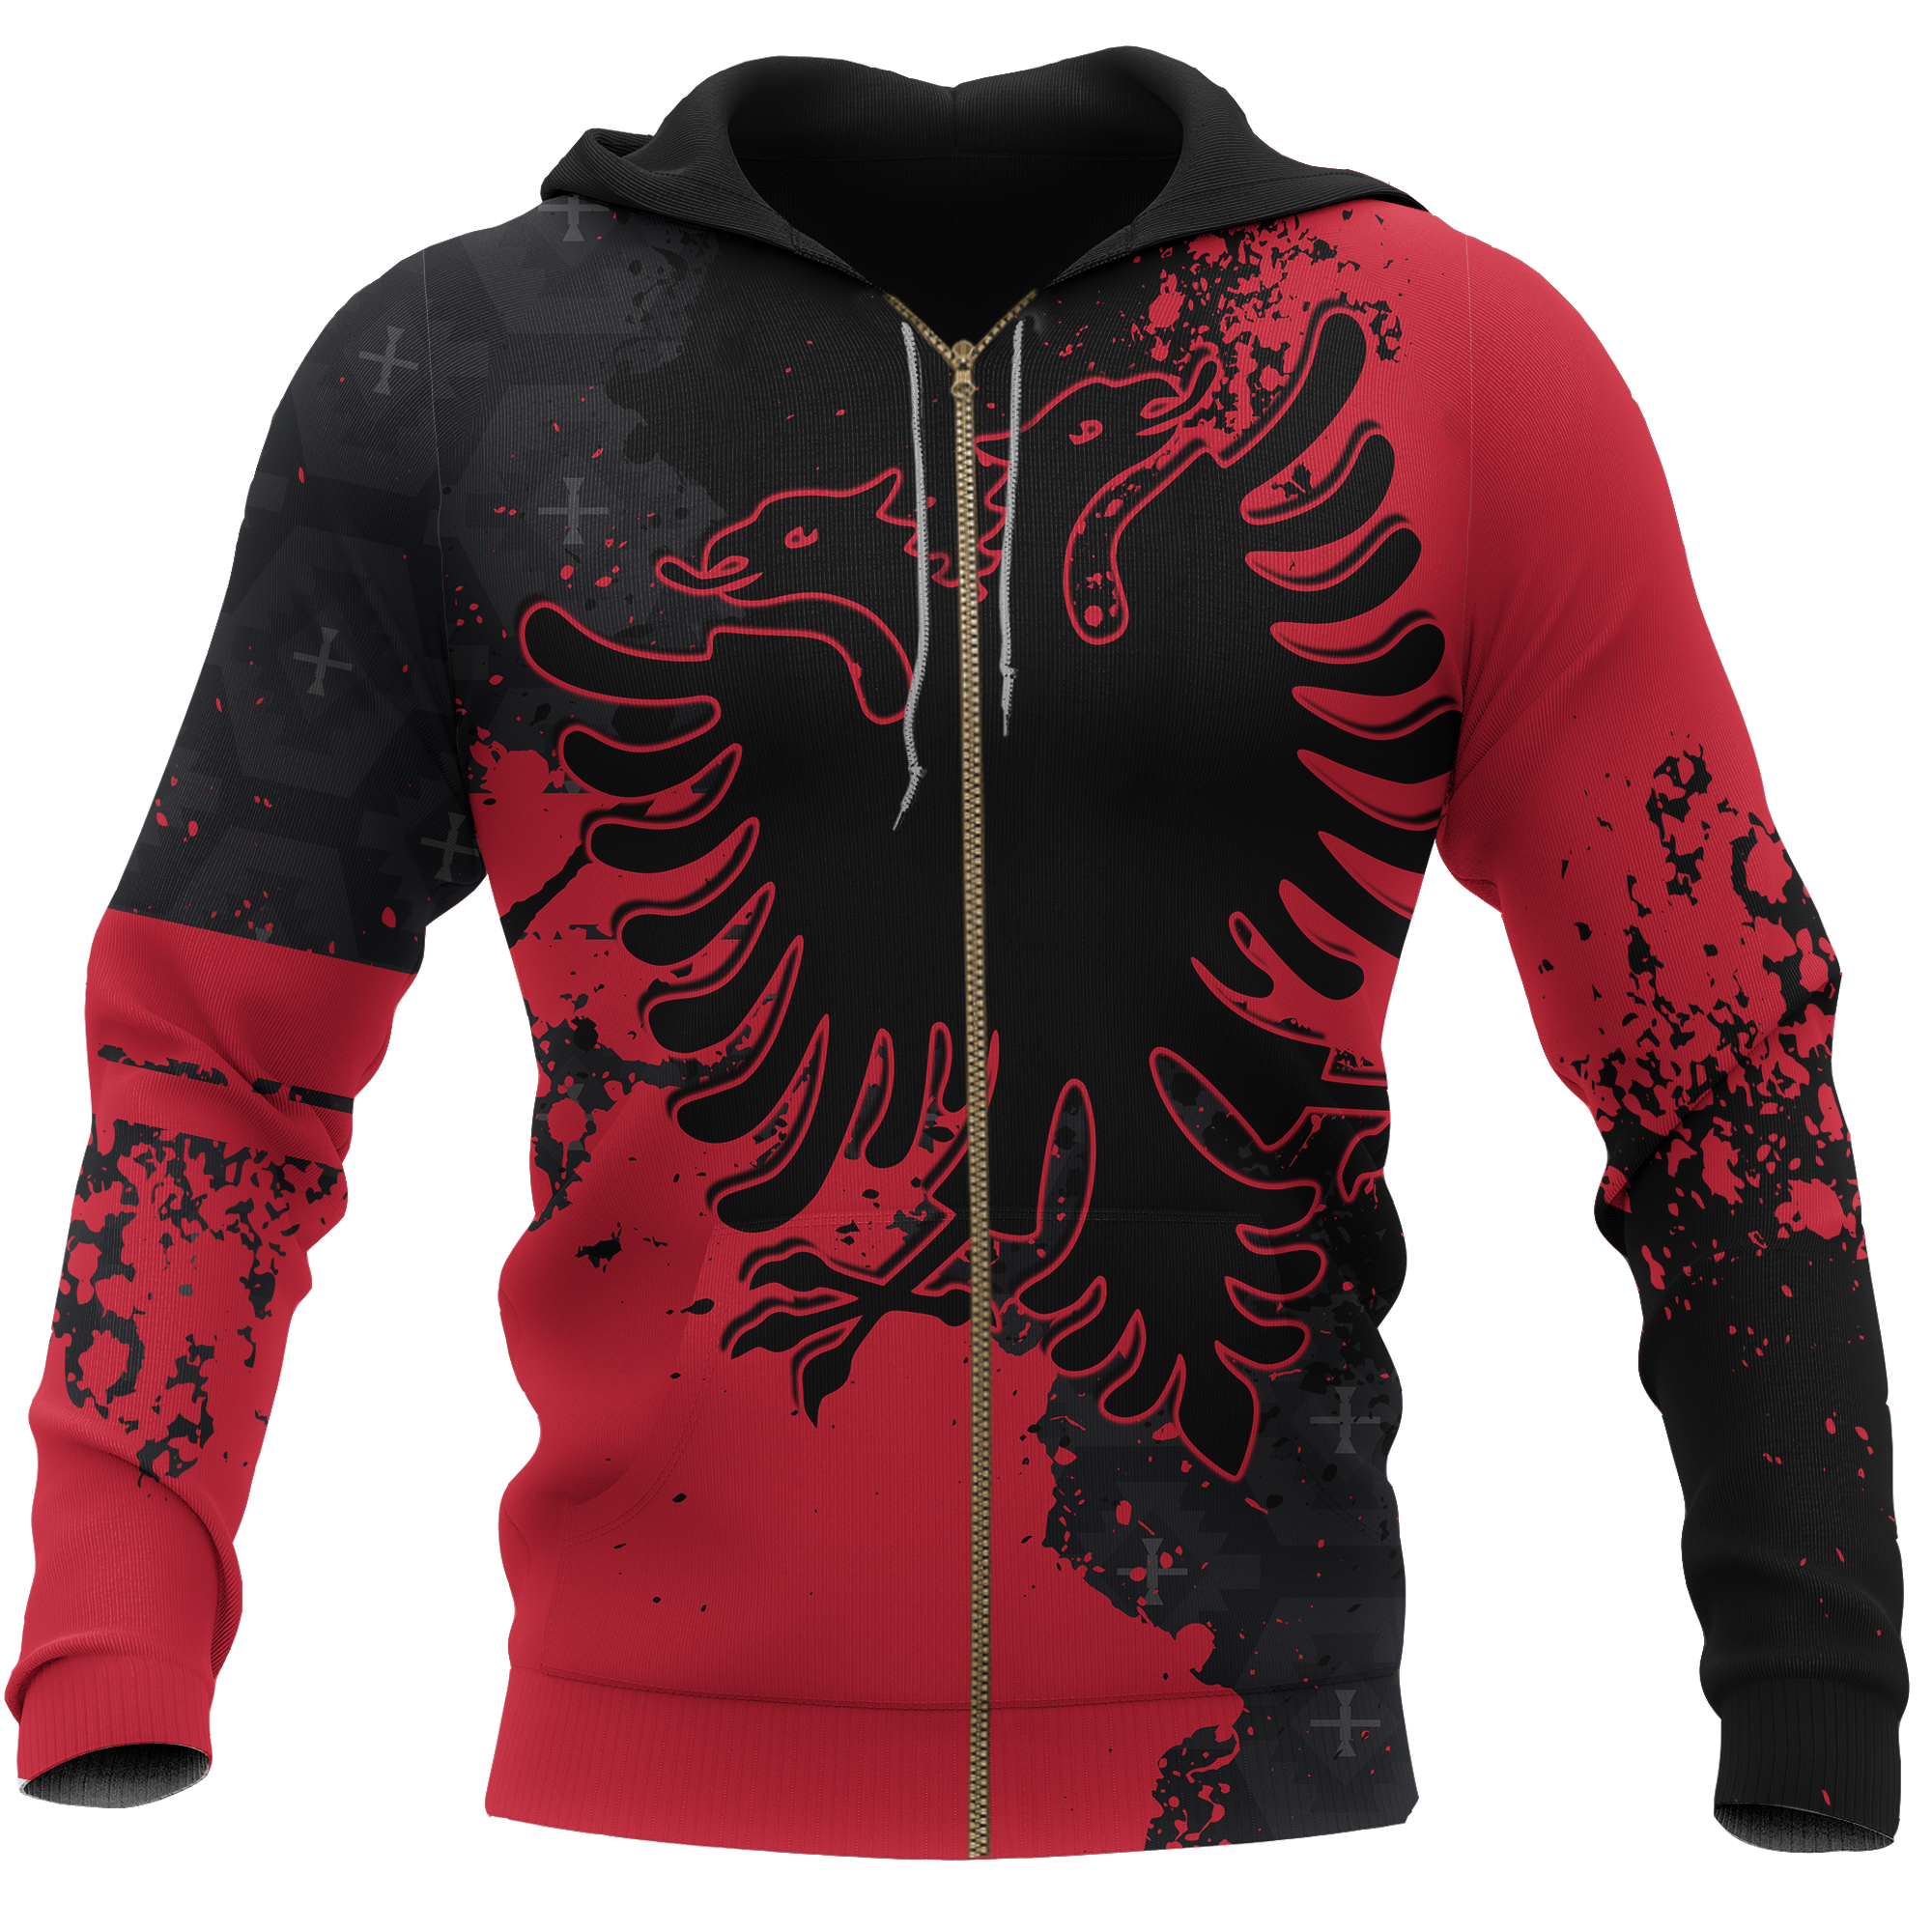 albania-zip-up-hoodie-red-eagle-style